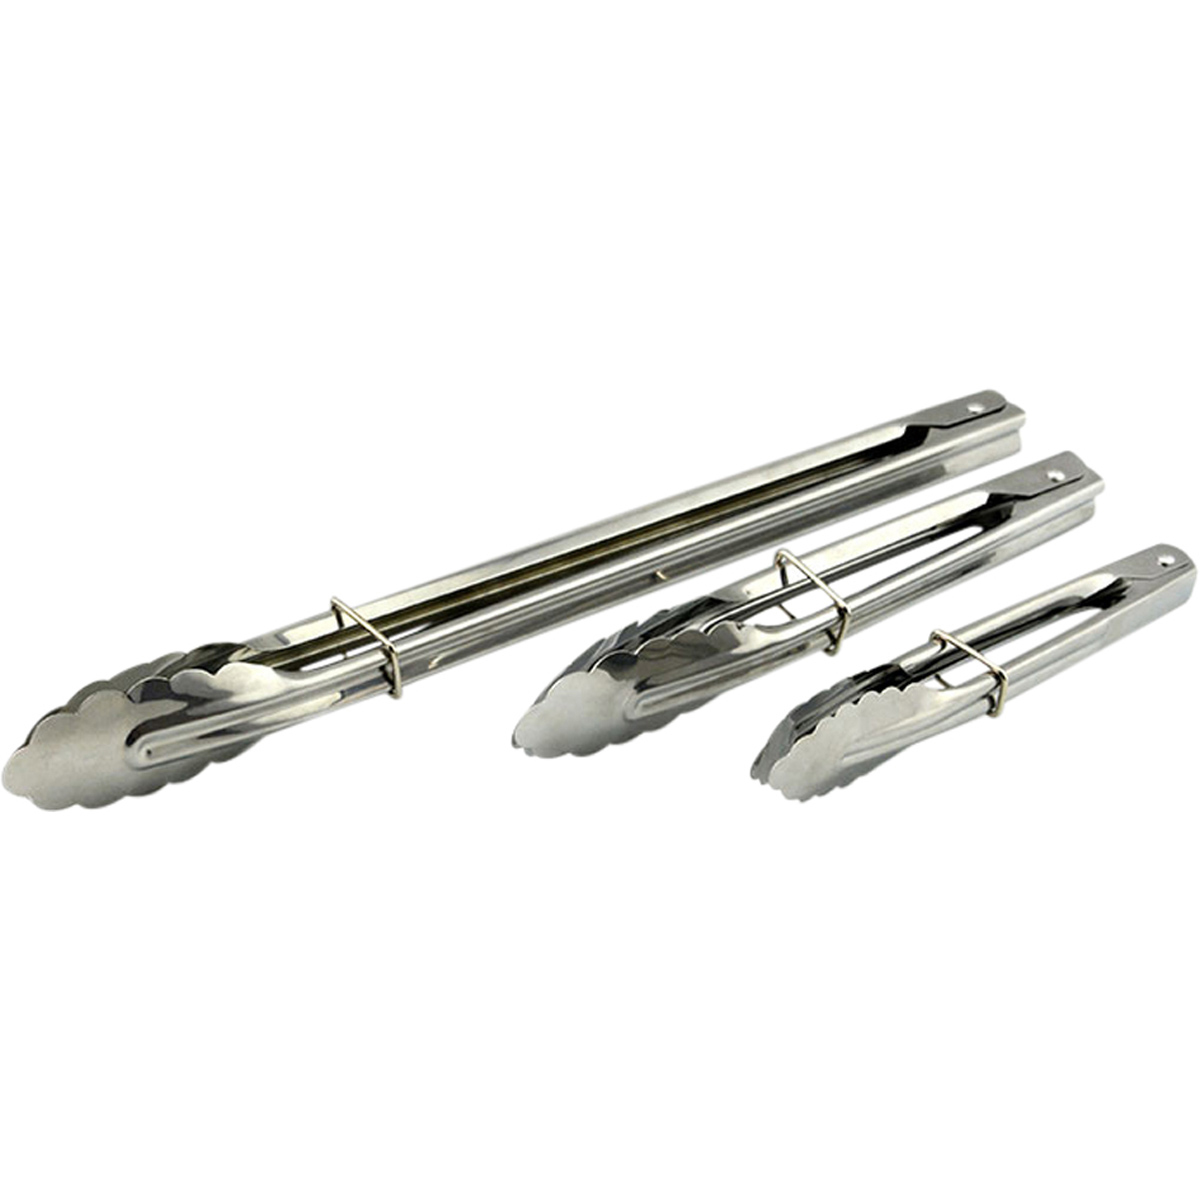 Stainless Steel Tong Set 3 Piece